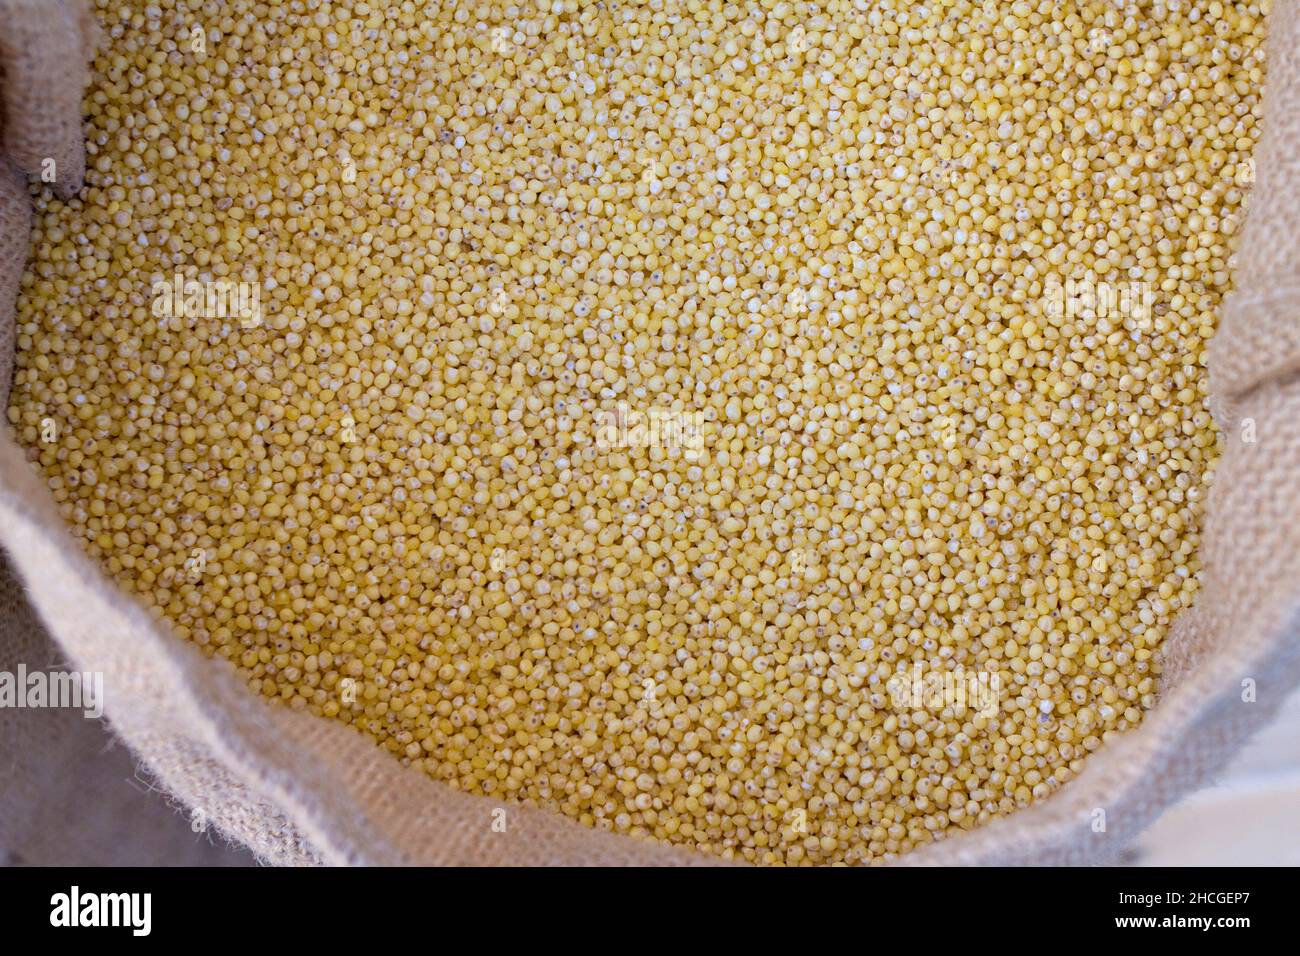 Burlap sack with raw millet or oat Stock Photo